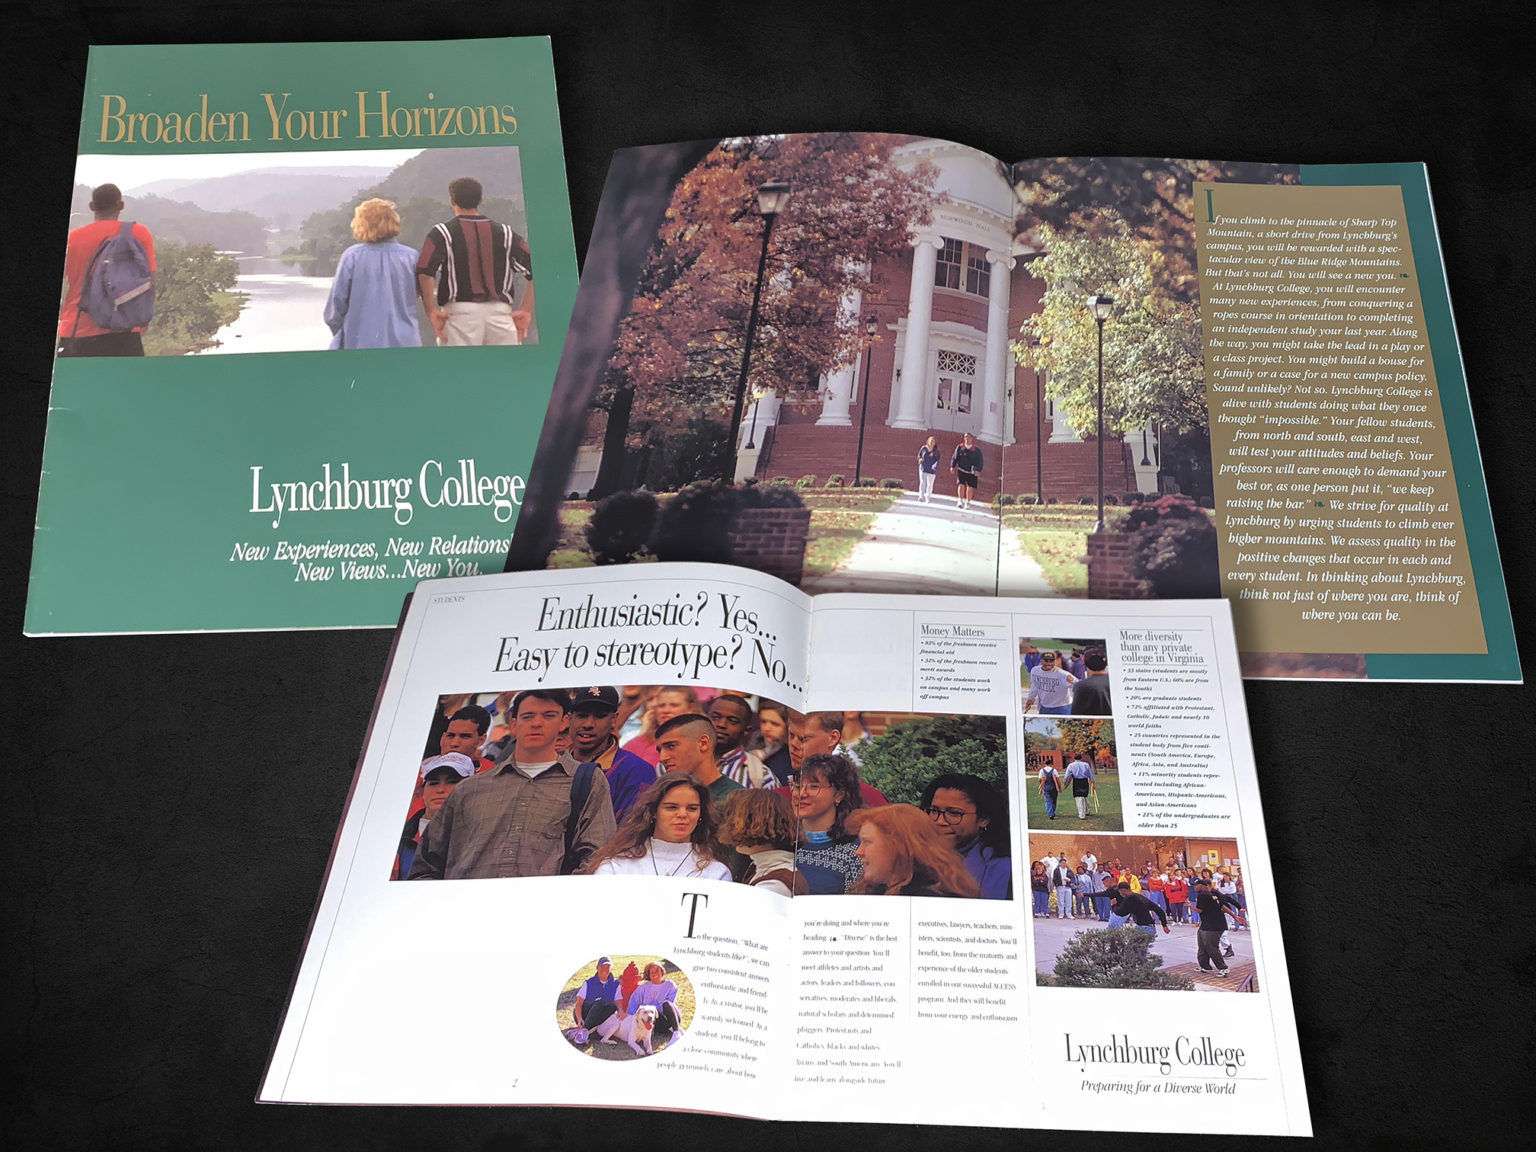 Lynchburg College Viewbook Material • Designed by: Designs In Motion, Inc.